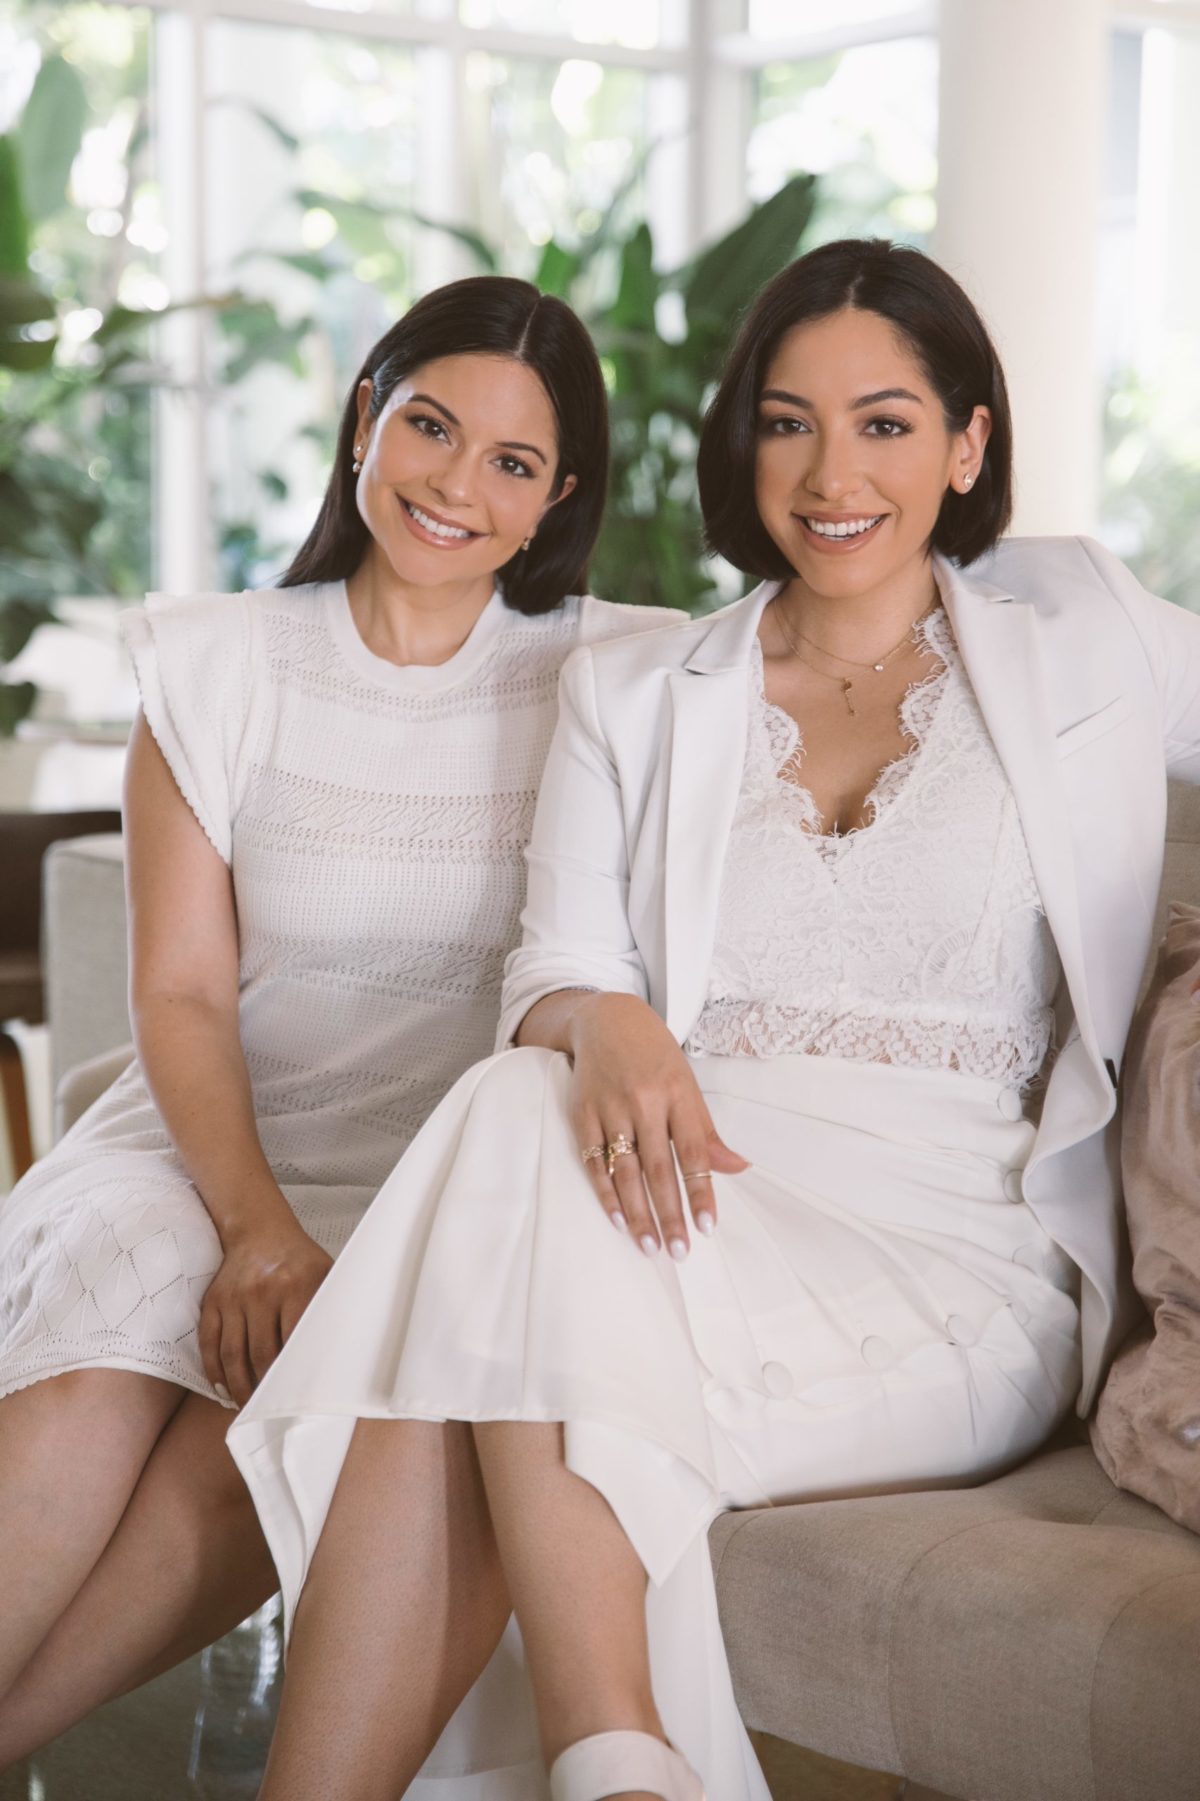 Two women dressed in white smiling as they sit on a sofa